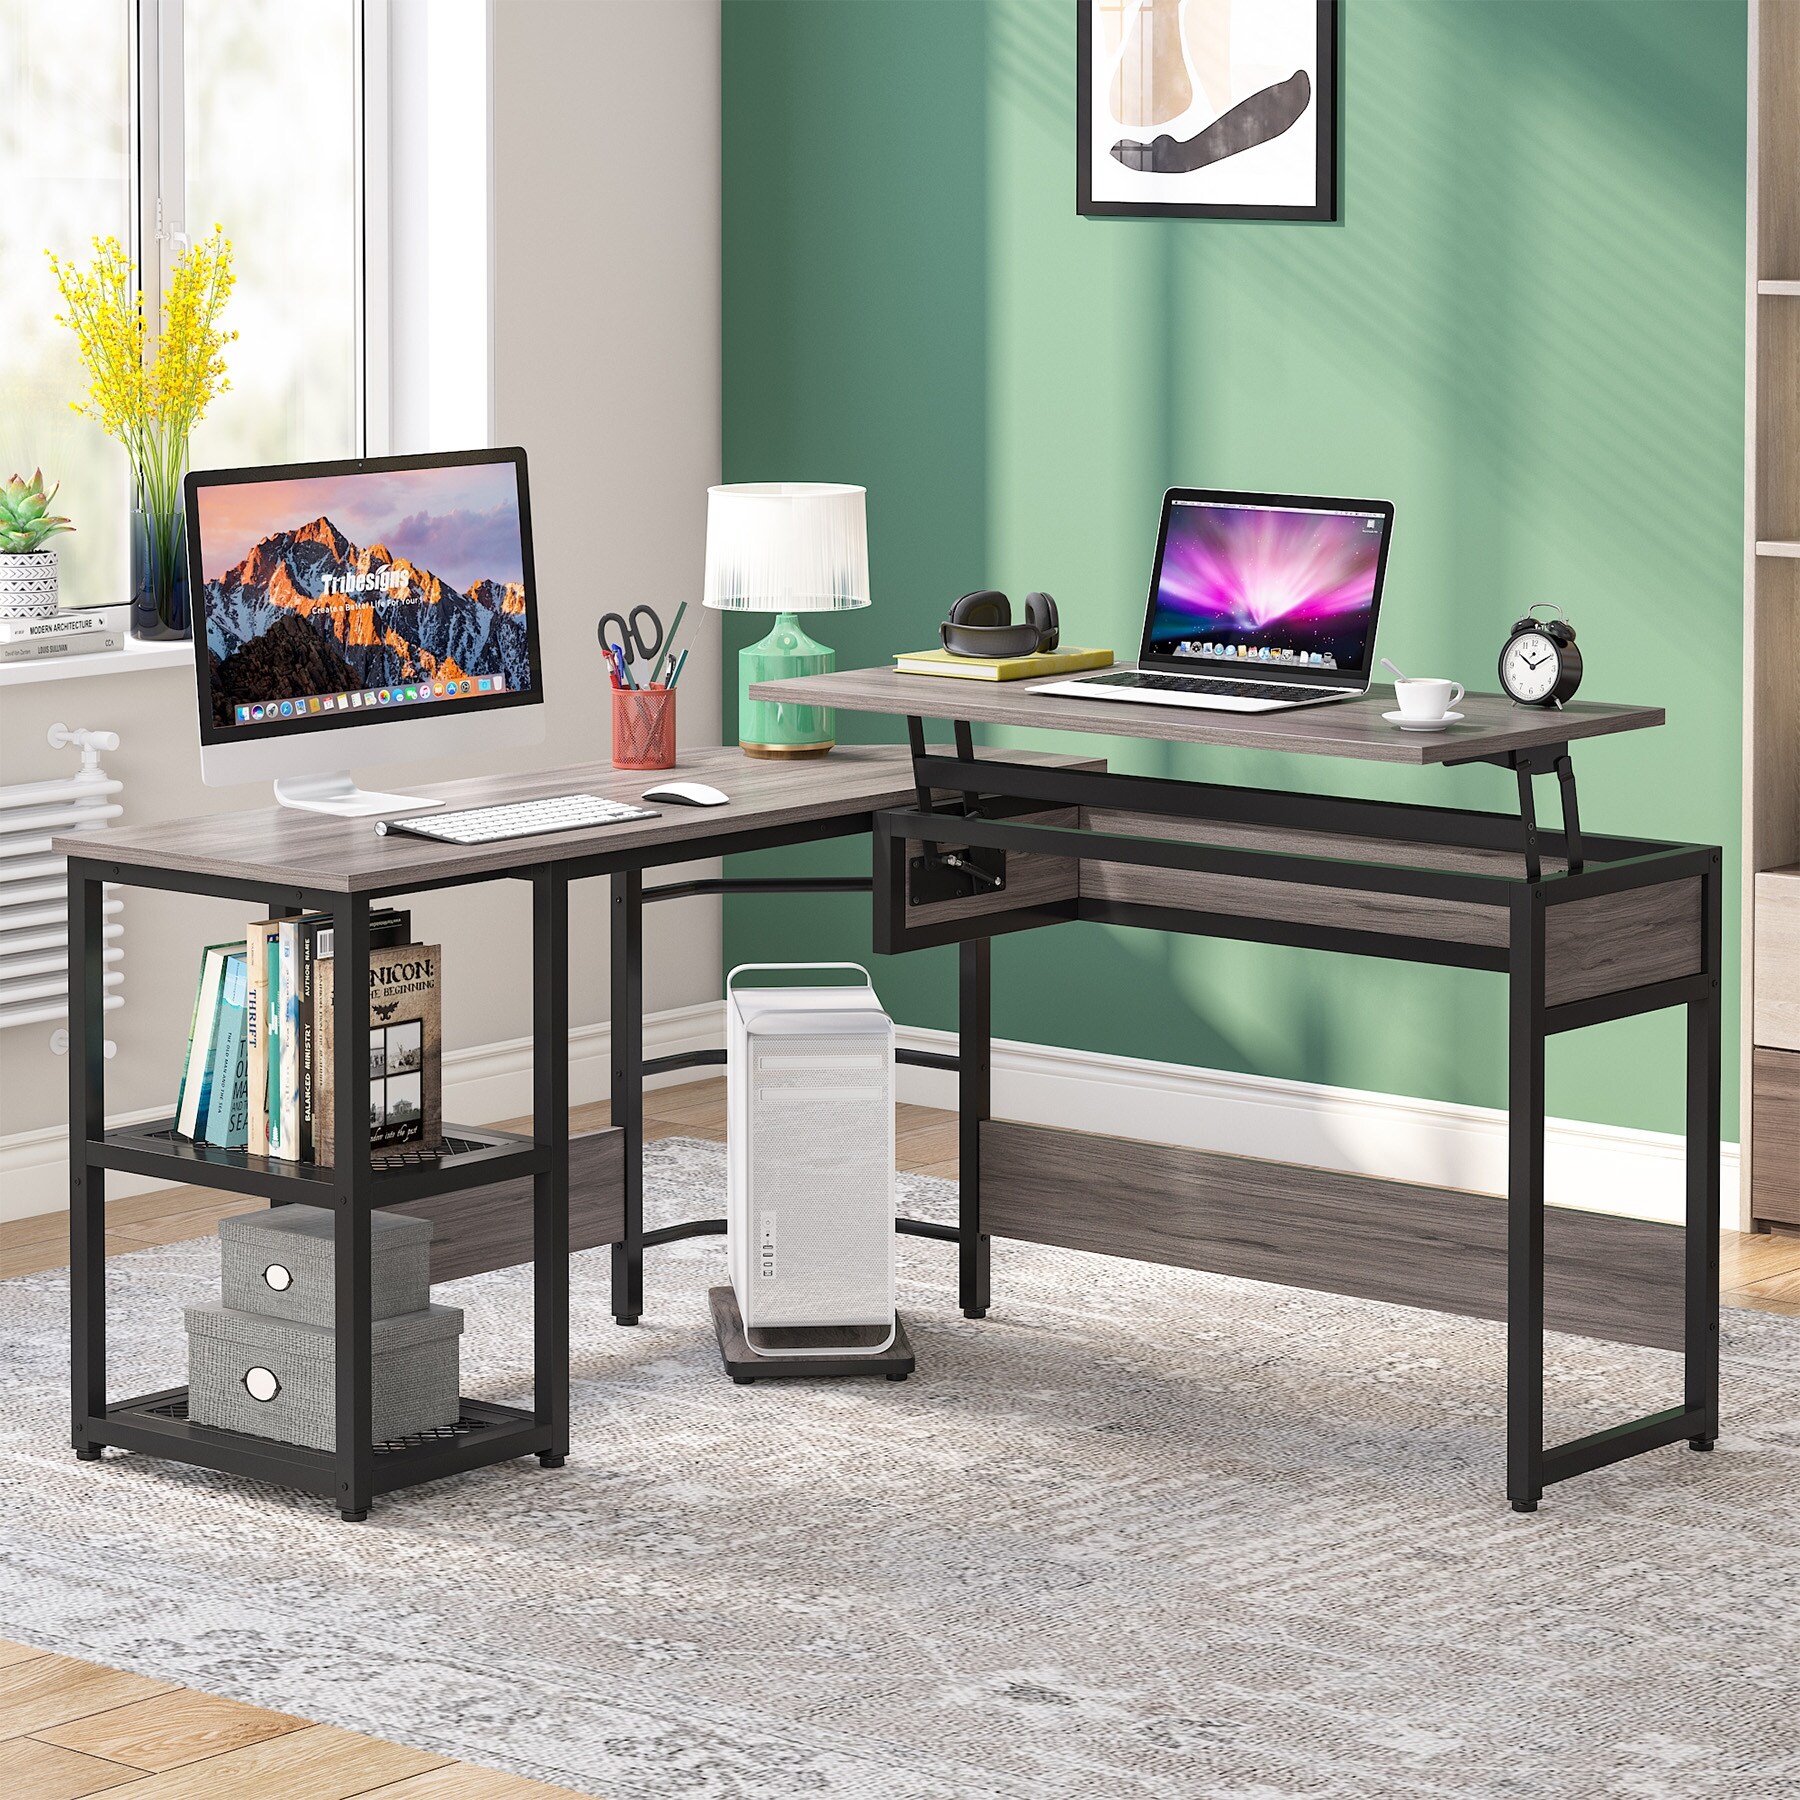 https://ak1.ostkcdn.com/images/products/is/images/direct/81bcbb053652b580ad6d4a4e859106c3bfcfb490/L-Shaped-Computer-Desk-with-Lift-Top%2C-59-inch-Height-Adjustable-Office-Corner-Desk-with-Shelves.jpg